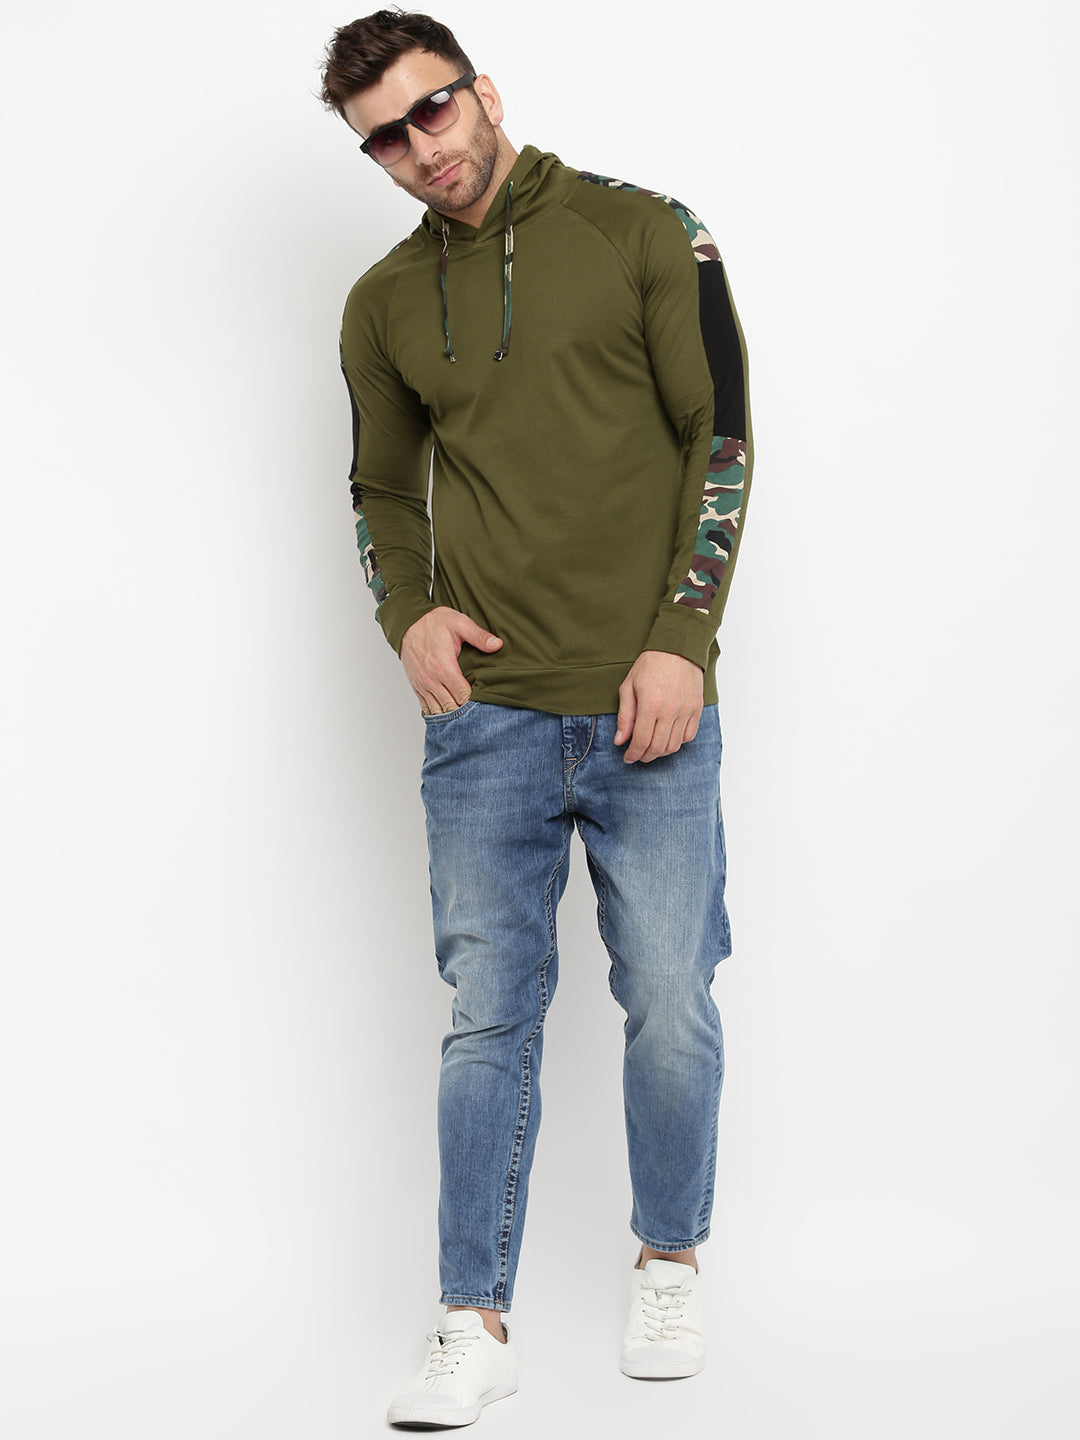 Olive Camouflage Hooded T-Shirt